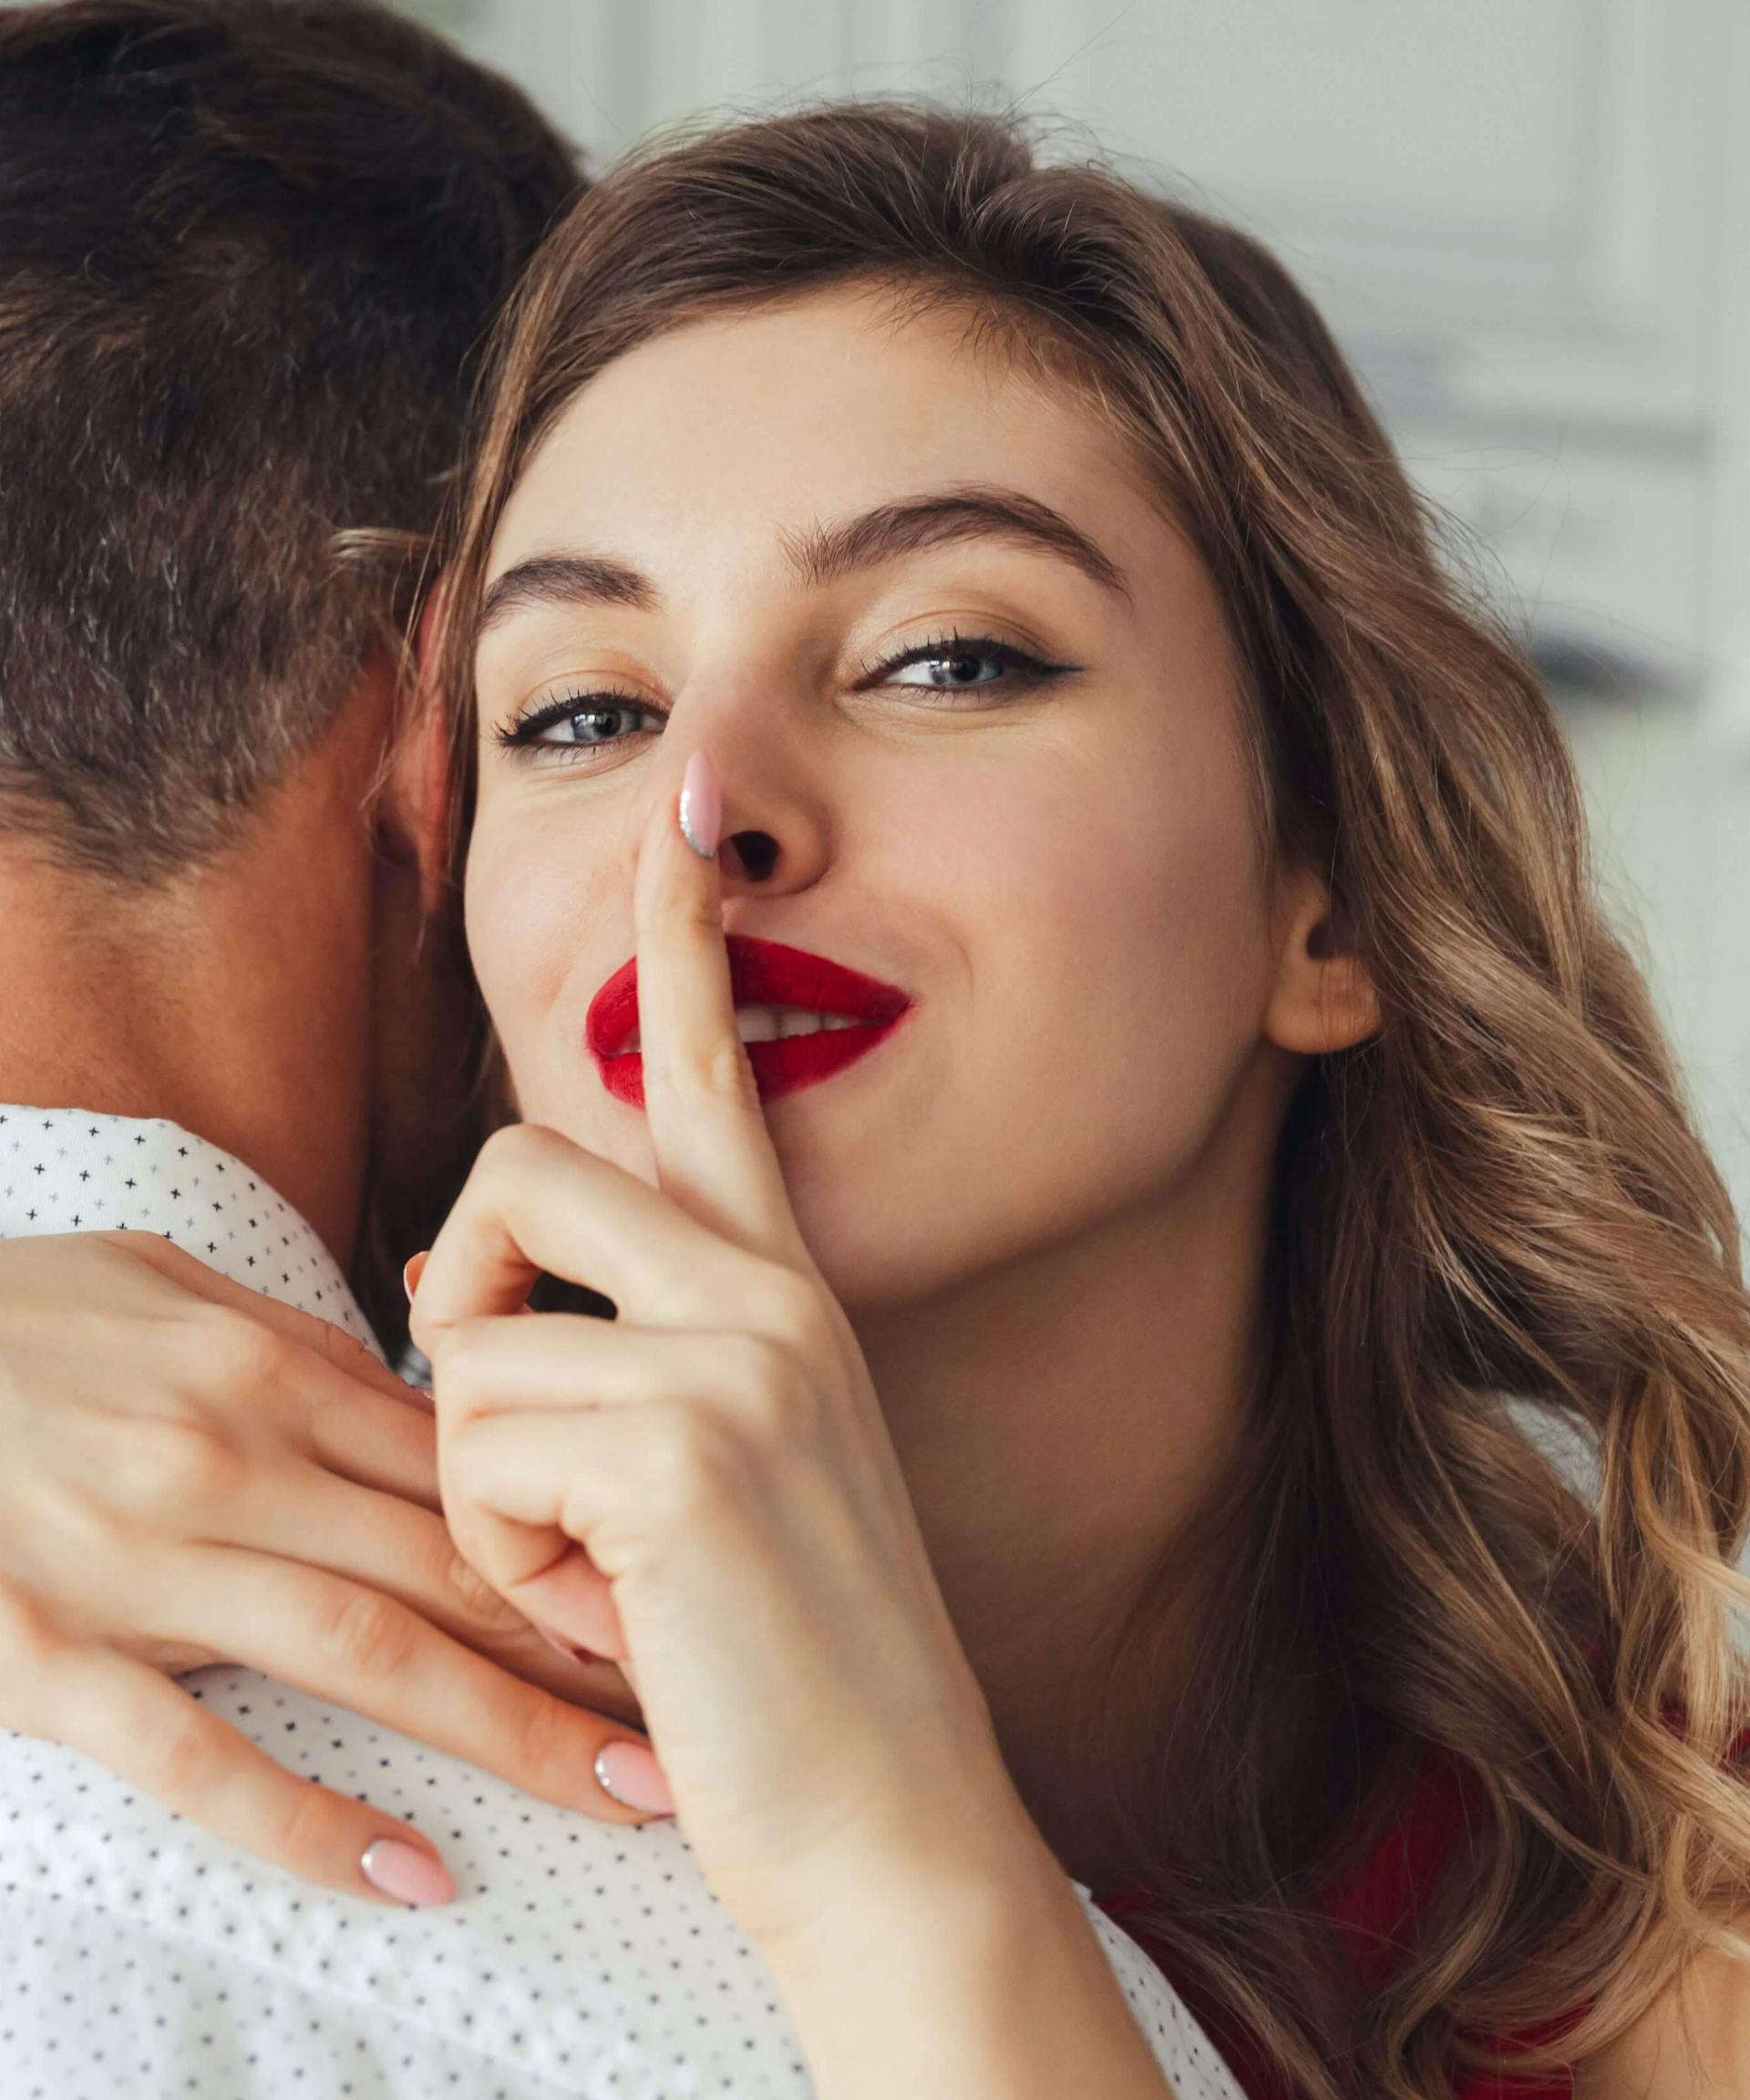 Dating Less Might Be The Secret To Finding Mr. Right